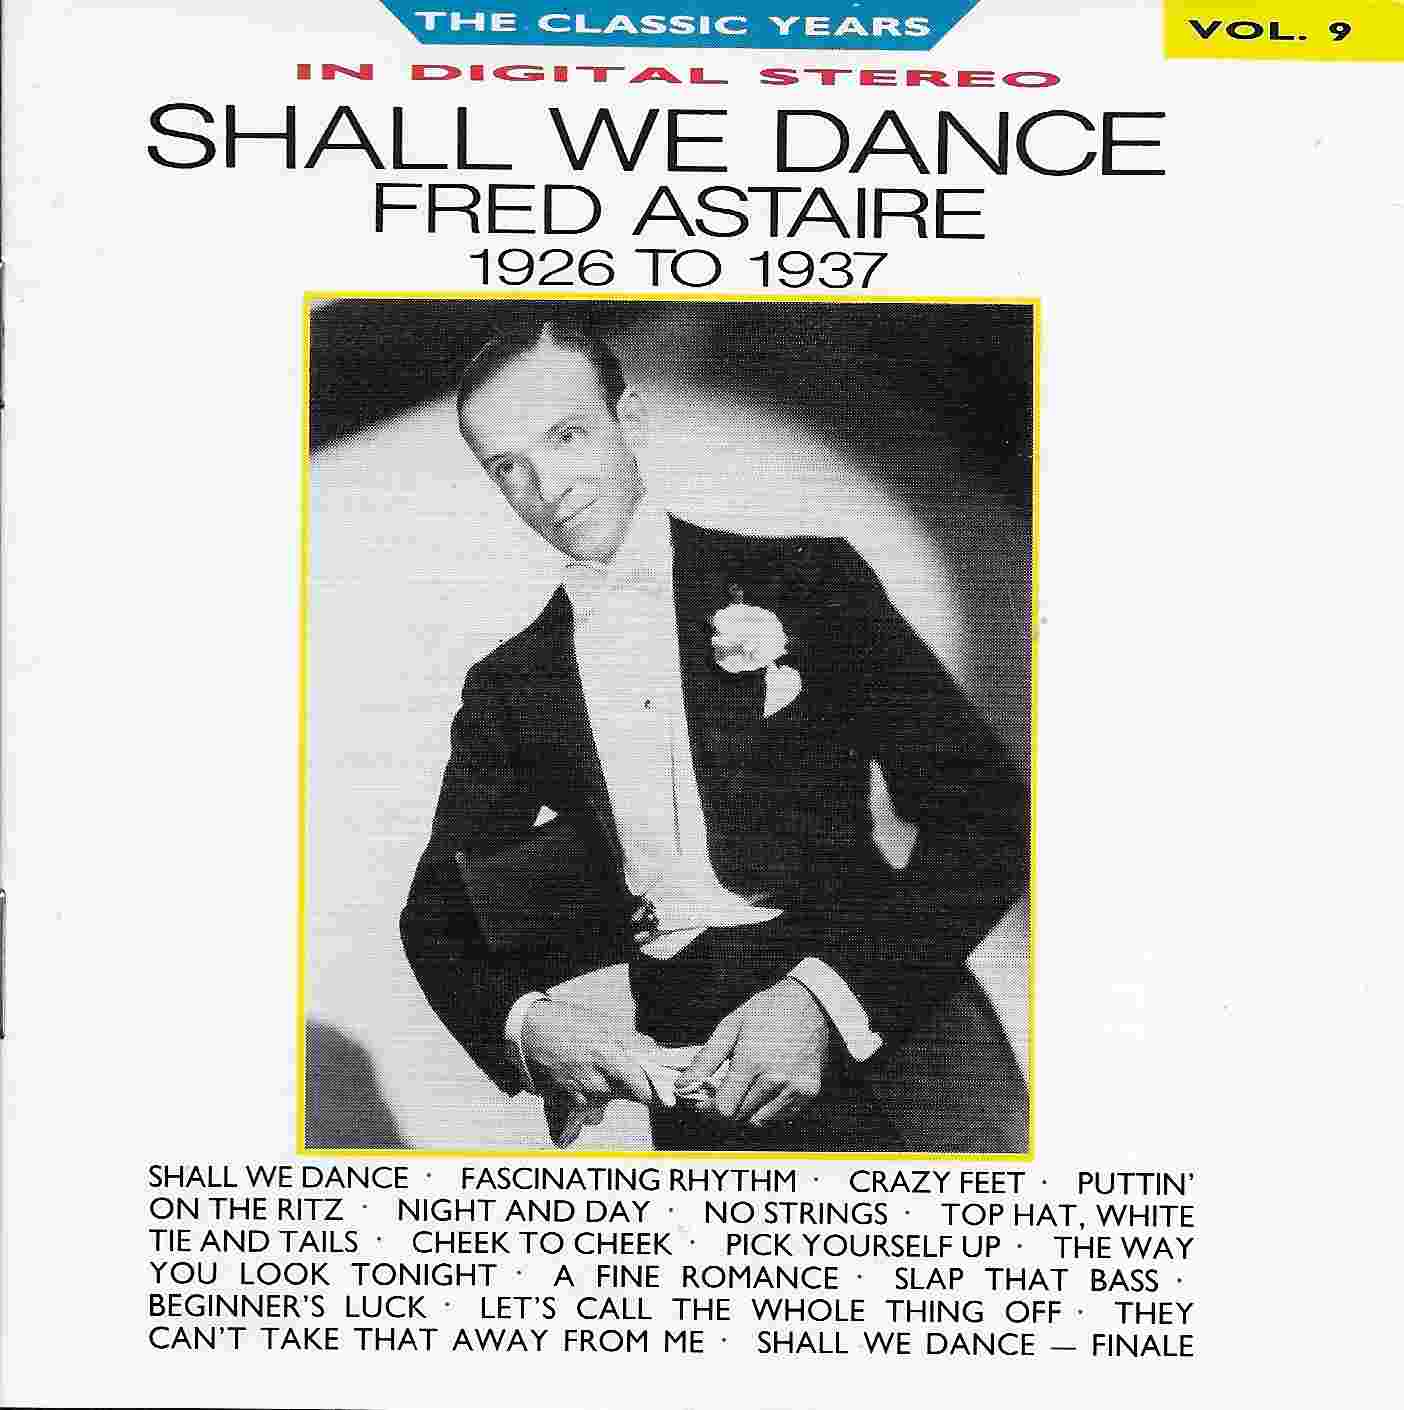 Picture of BBCCD665 Classic years - Volume 9, Fred Astaire by artist Fred Astaire from the BBC cds - Records and Tapes library